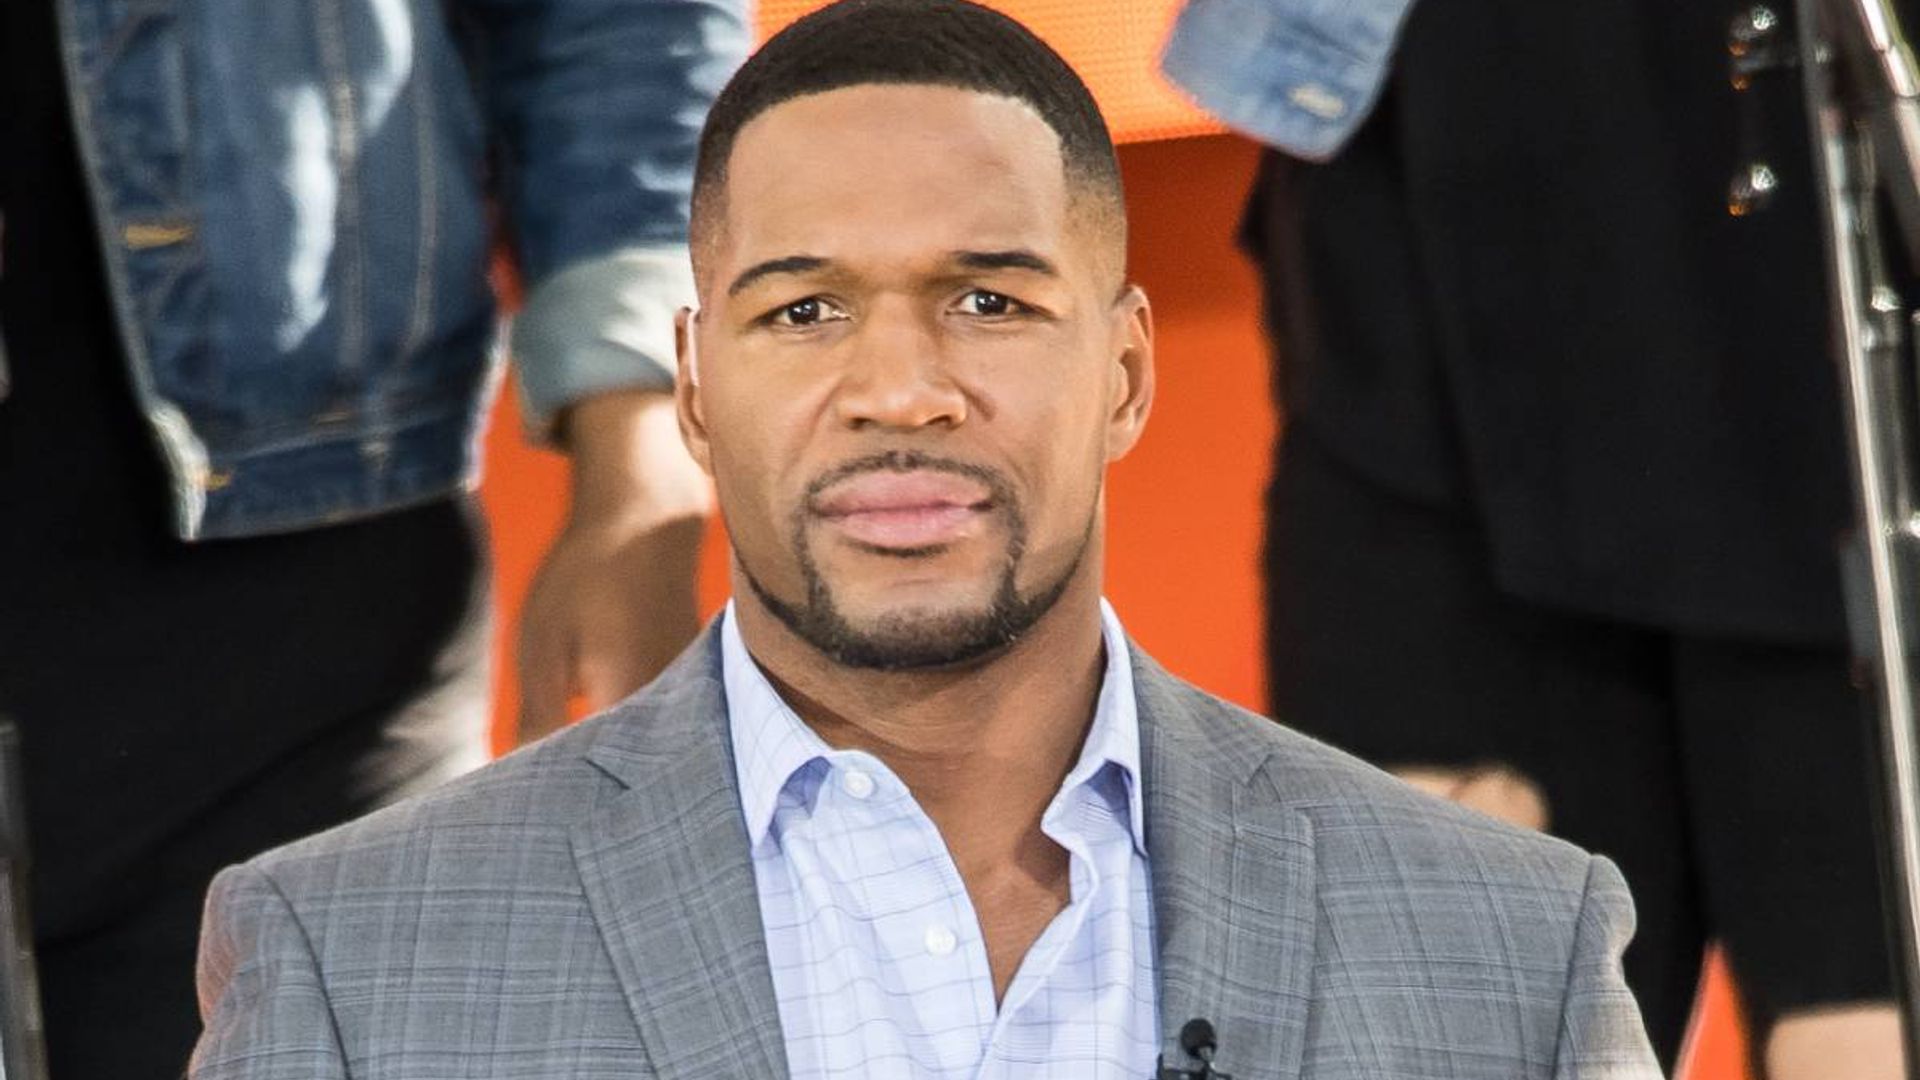 Michael Strahan applauded for sharing powerful story about struggle in supportive new video